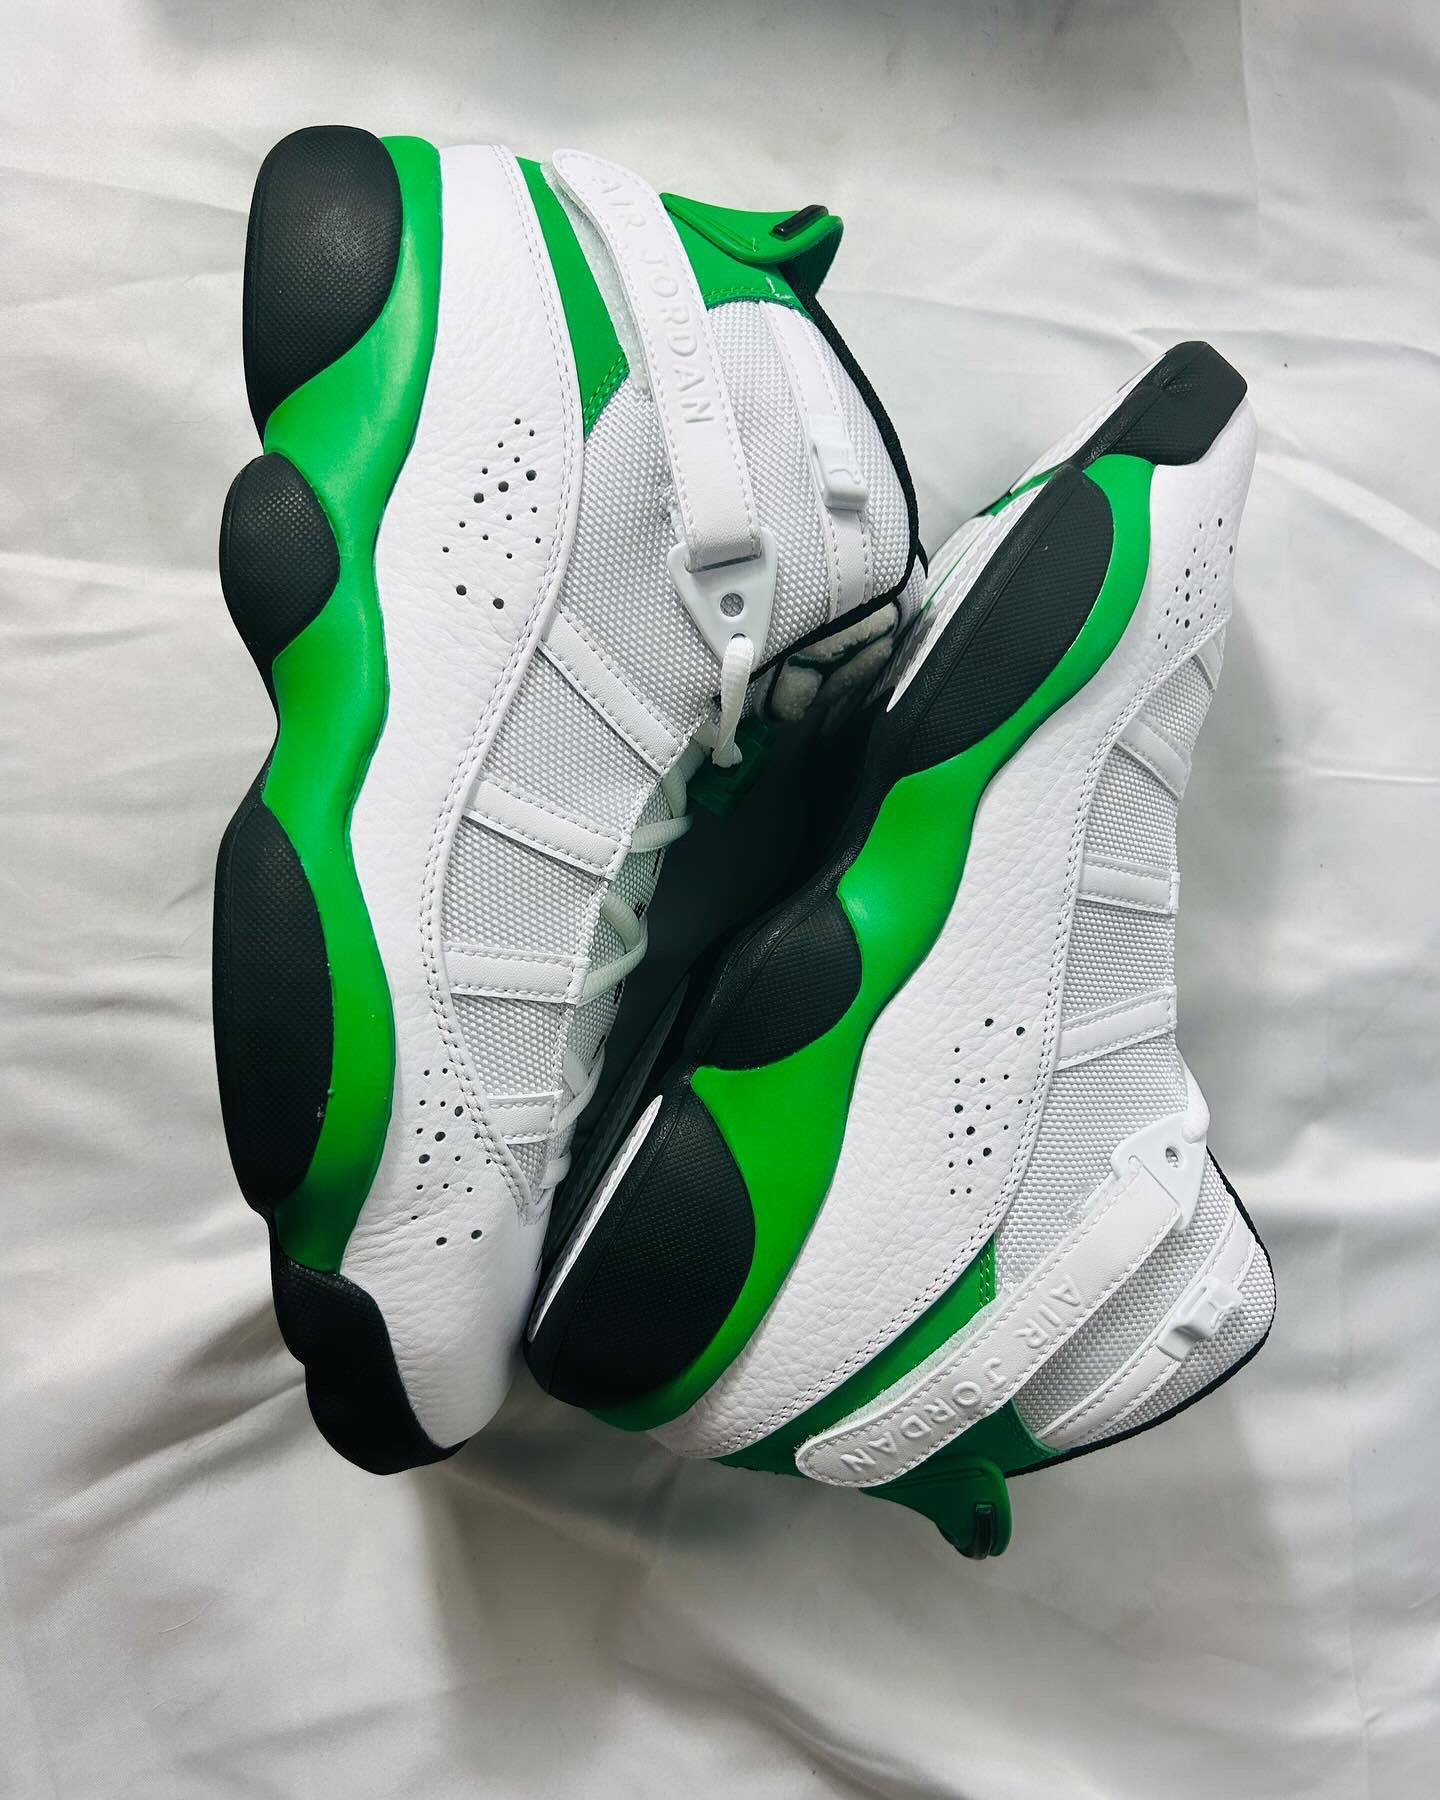 Air Jordan 6 Rings "Lucky Green" White Black 322992-131 Mens 10 ($130) (contact info removed) 📲📲